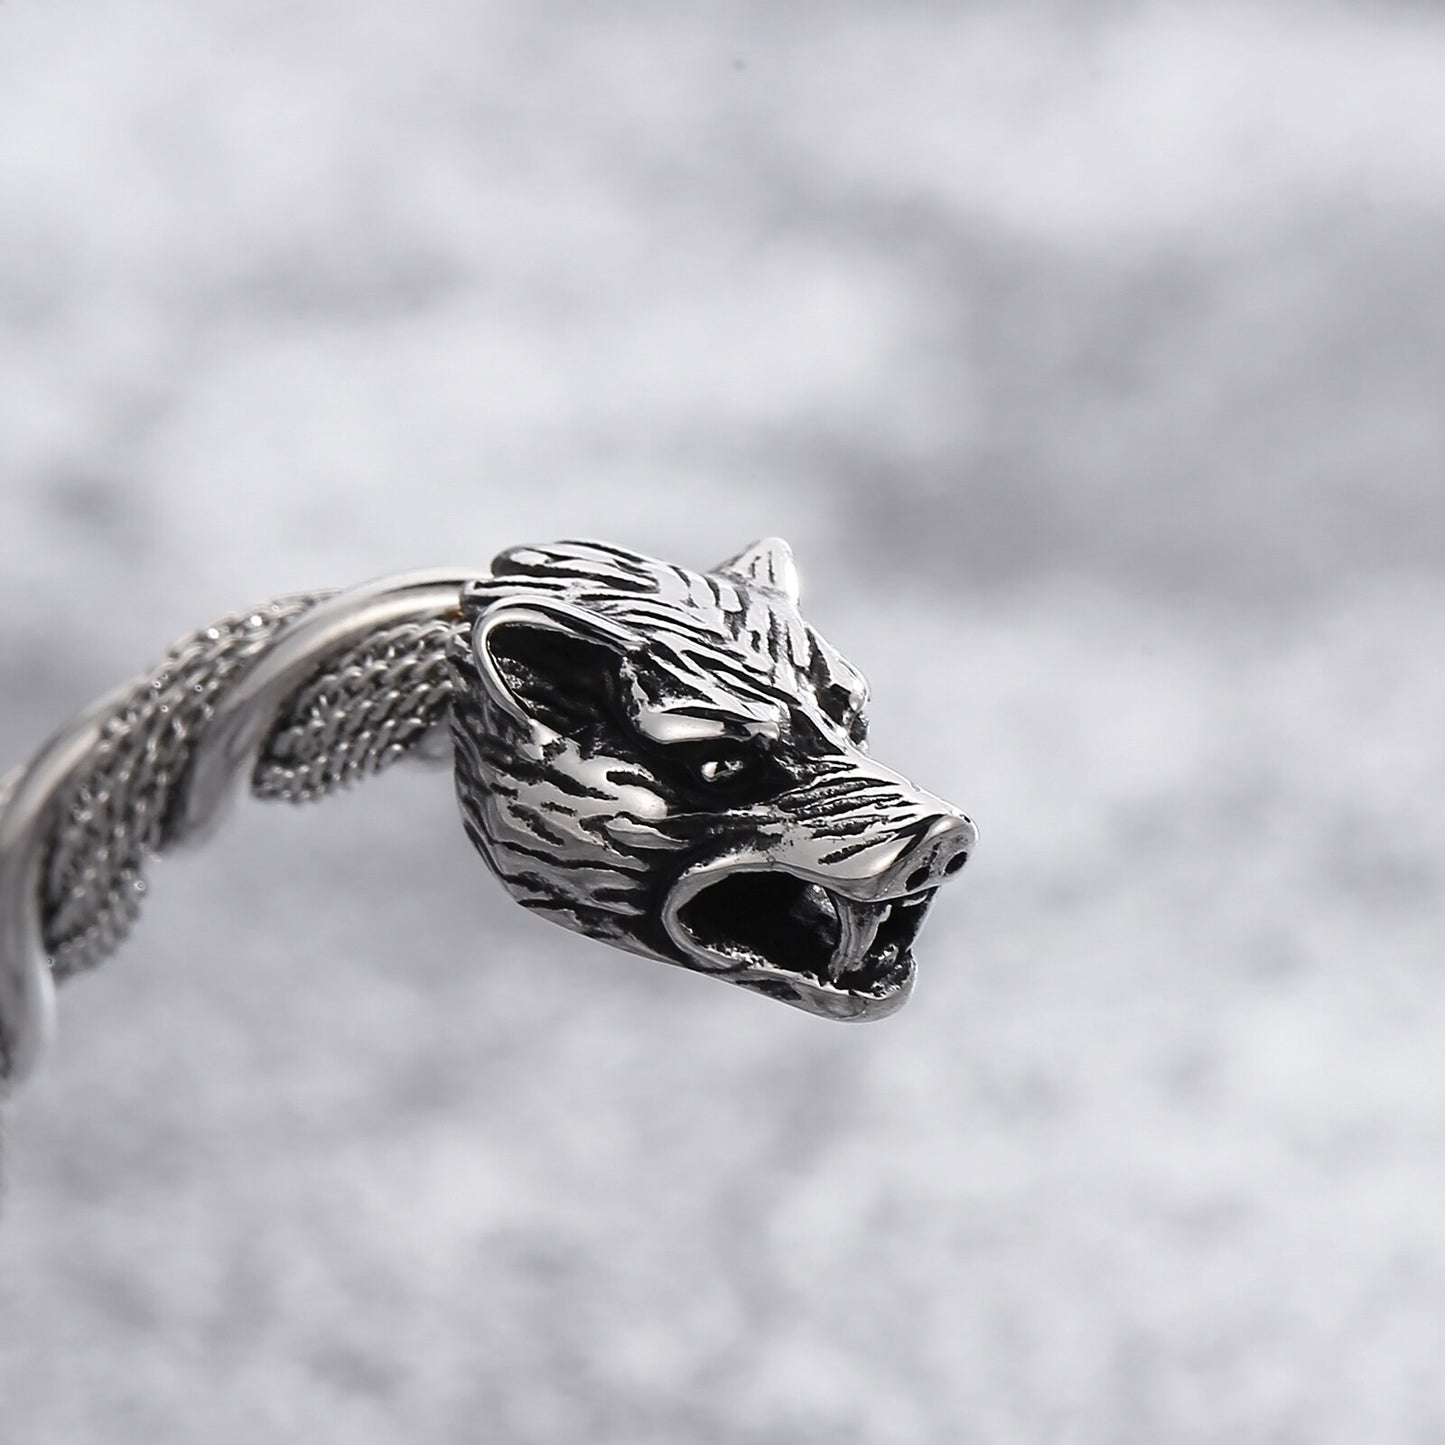 Snake Wolf Charms Open Bangle For Men Stainless Steel Twist Link Chain Adjustable Punk Bracelet Bangles Fashion Jewelry